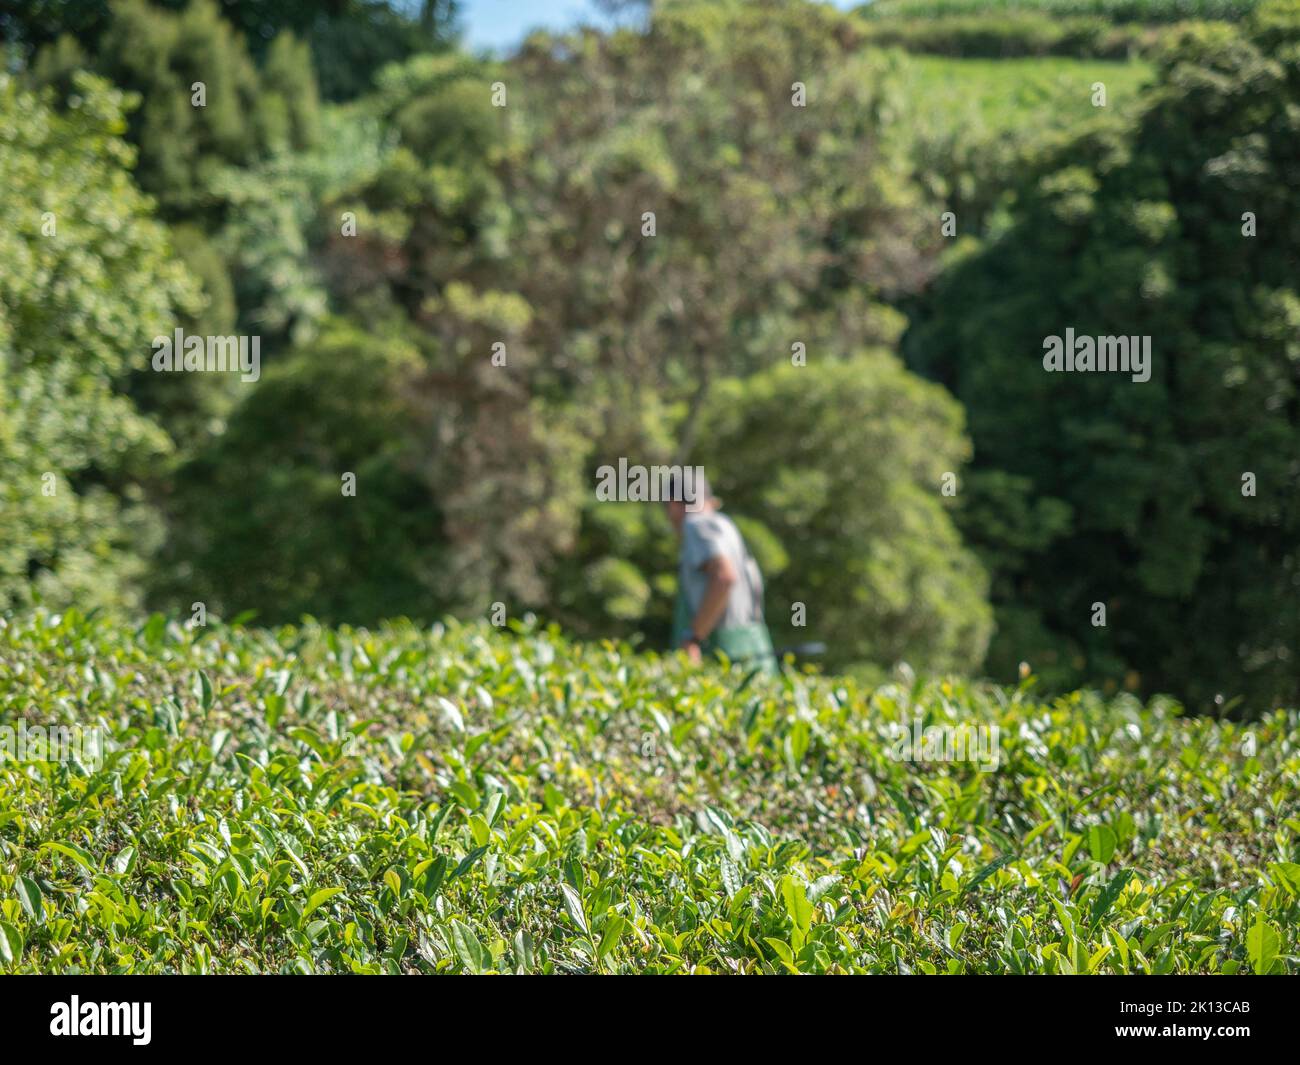 Tea Plantation workers on the Portuguese Azores island of Sao Miguel which is Europe's only Tea plantation. Stock Photo